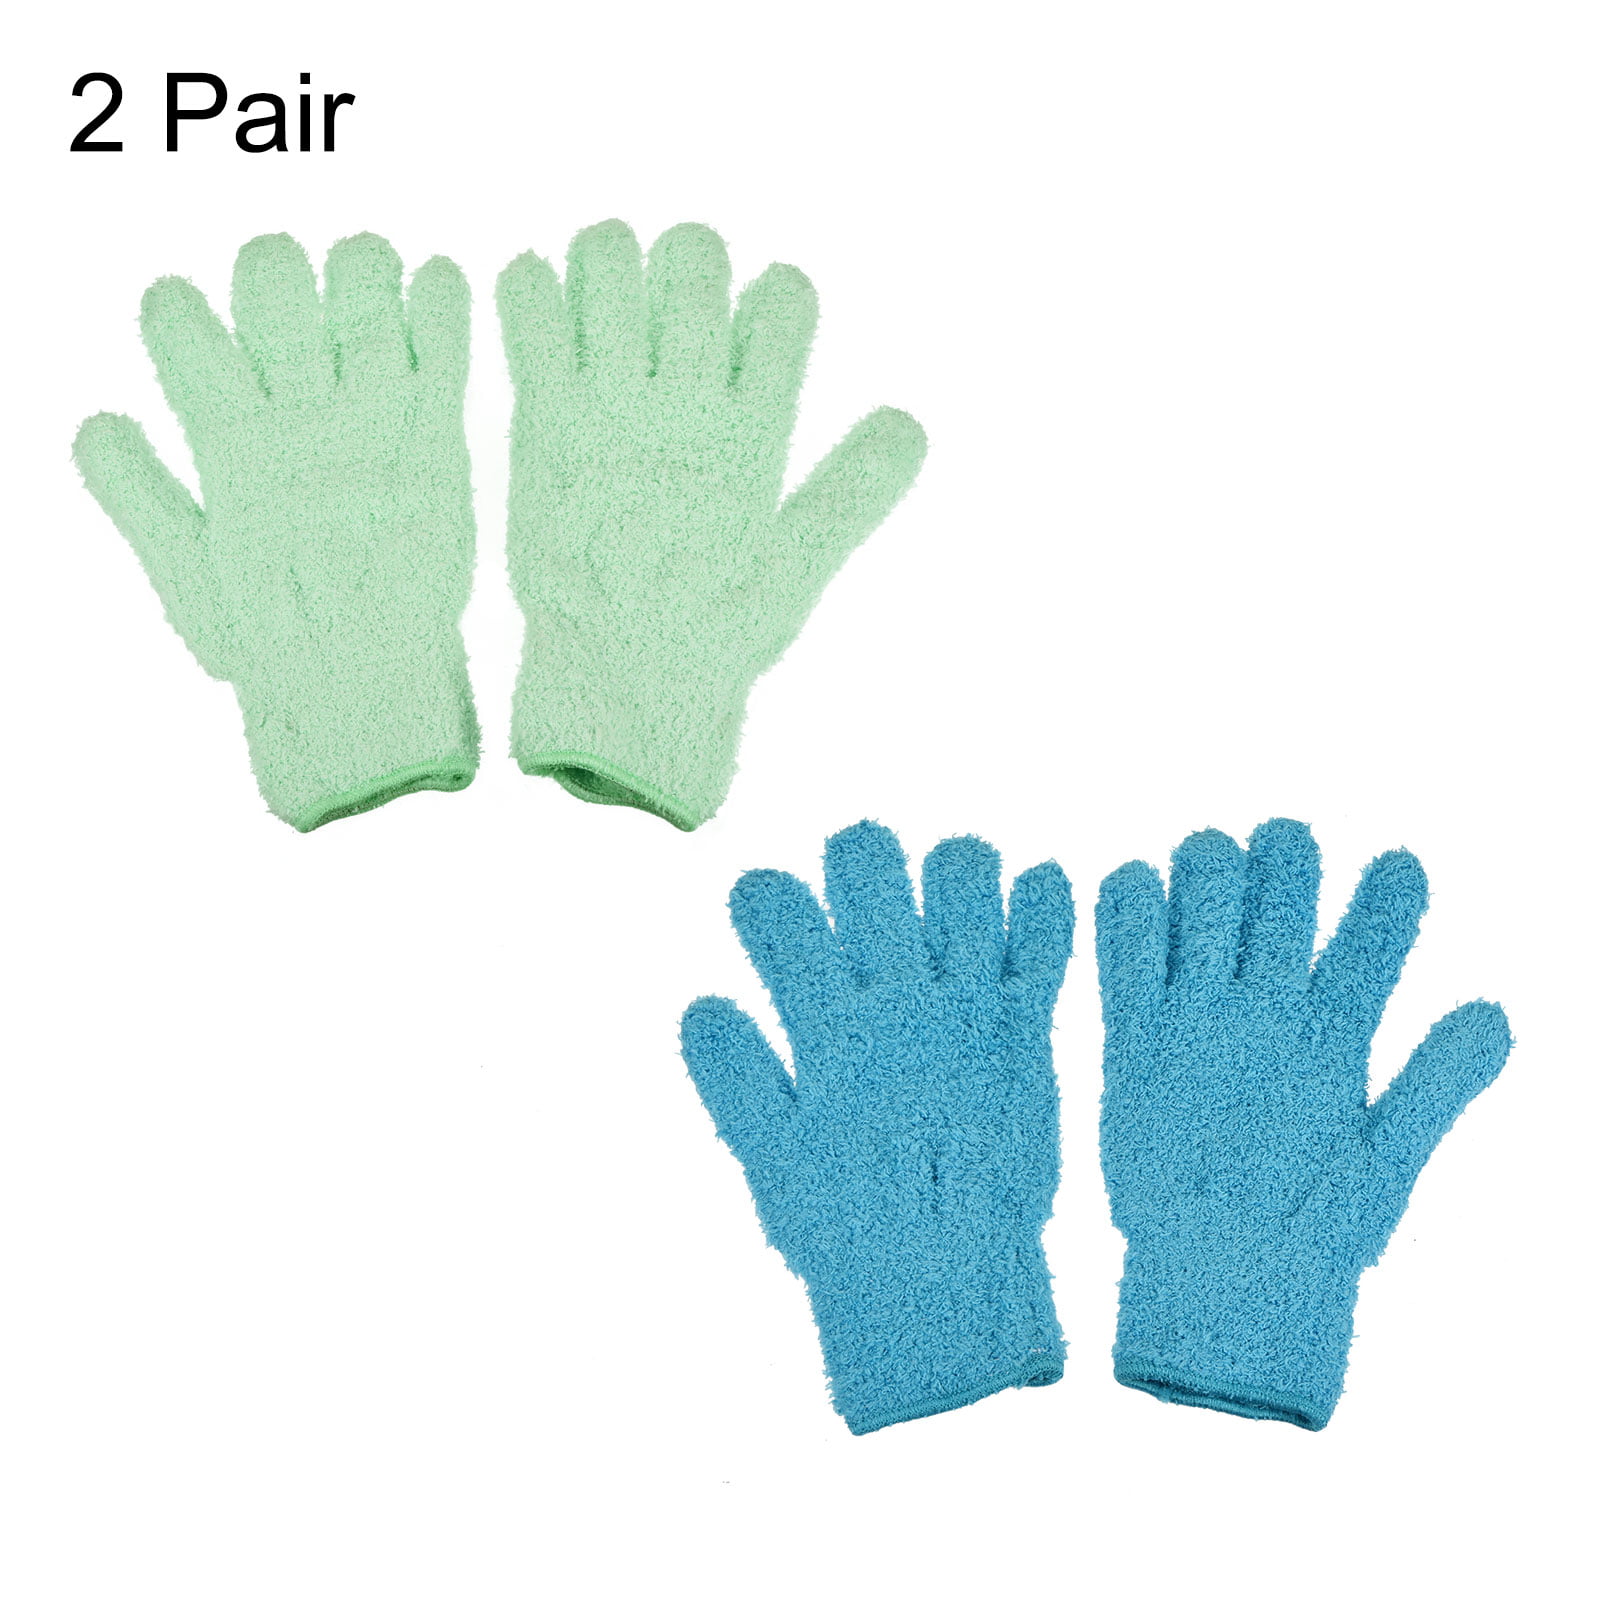  2 Pairs Microfiber Dusting Mitt Gloves with 1 Pair Microfiber Dusting  Mitt Washable Dusting Gloves for Cleaning(Blue, Green) : Health & Household